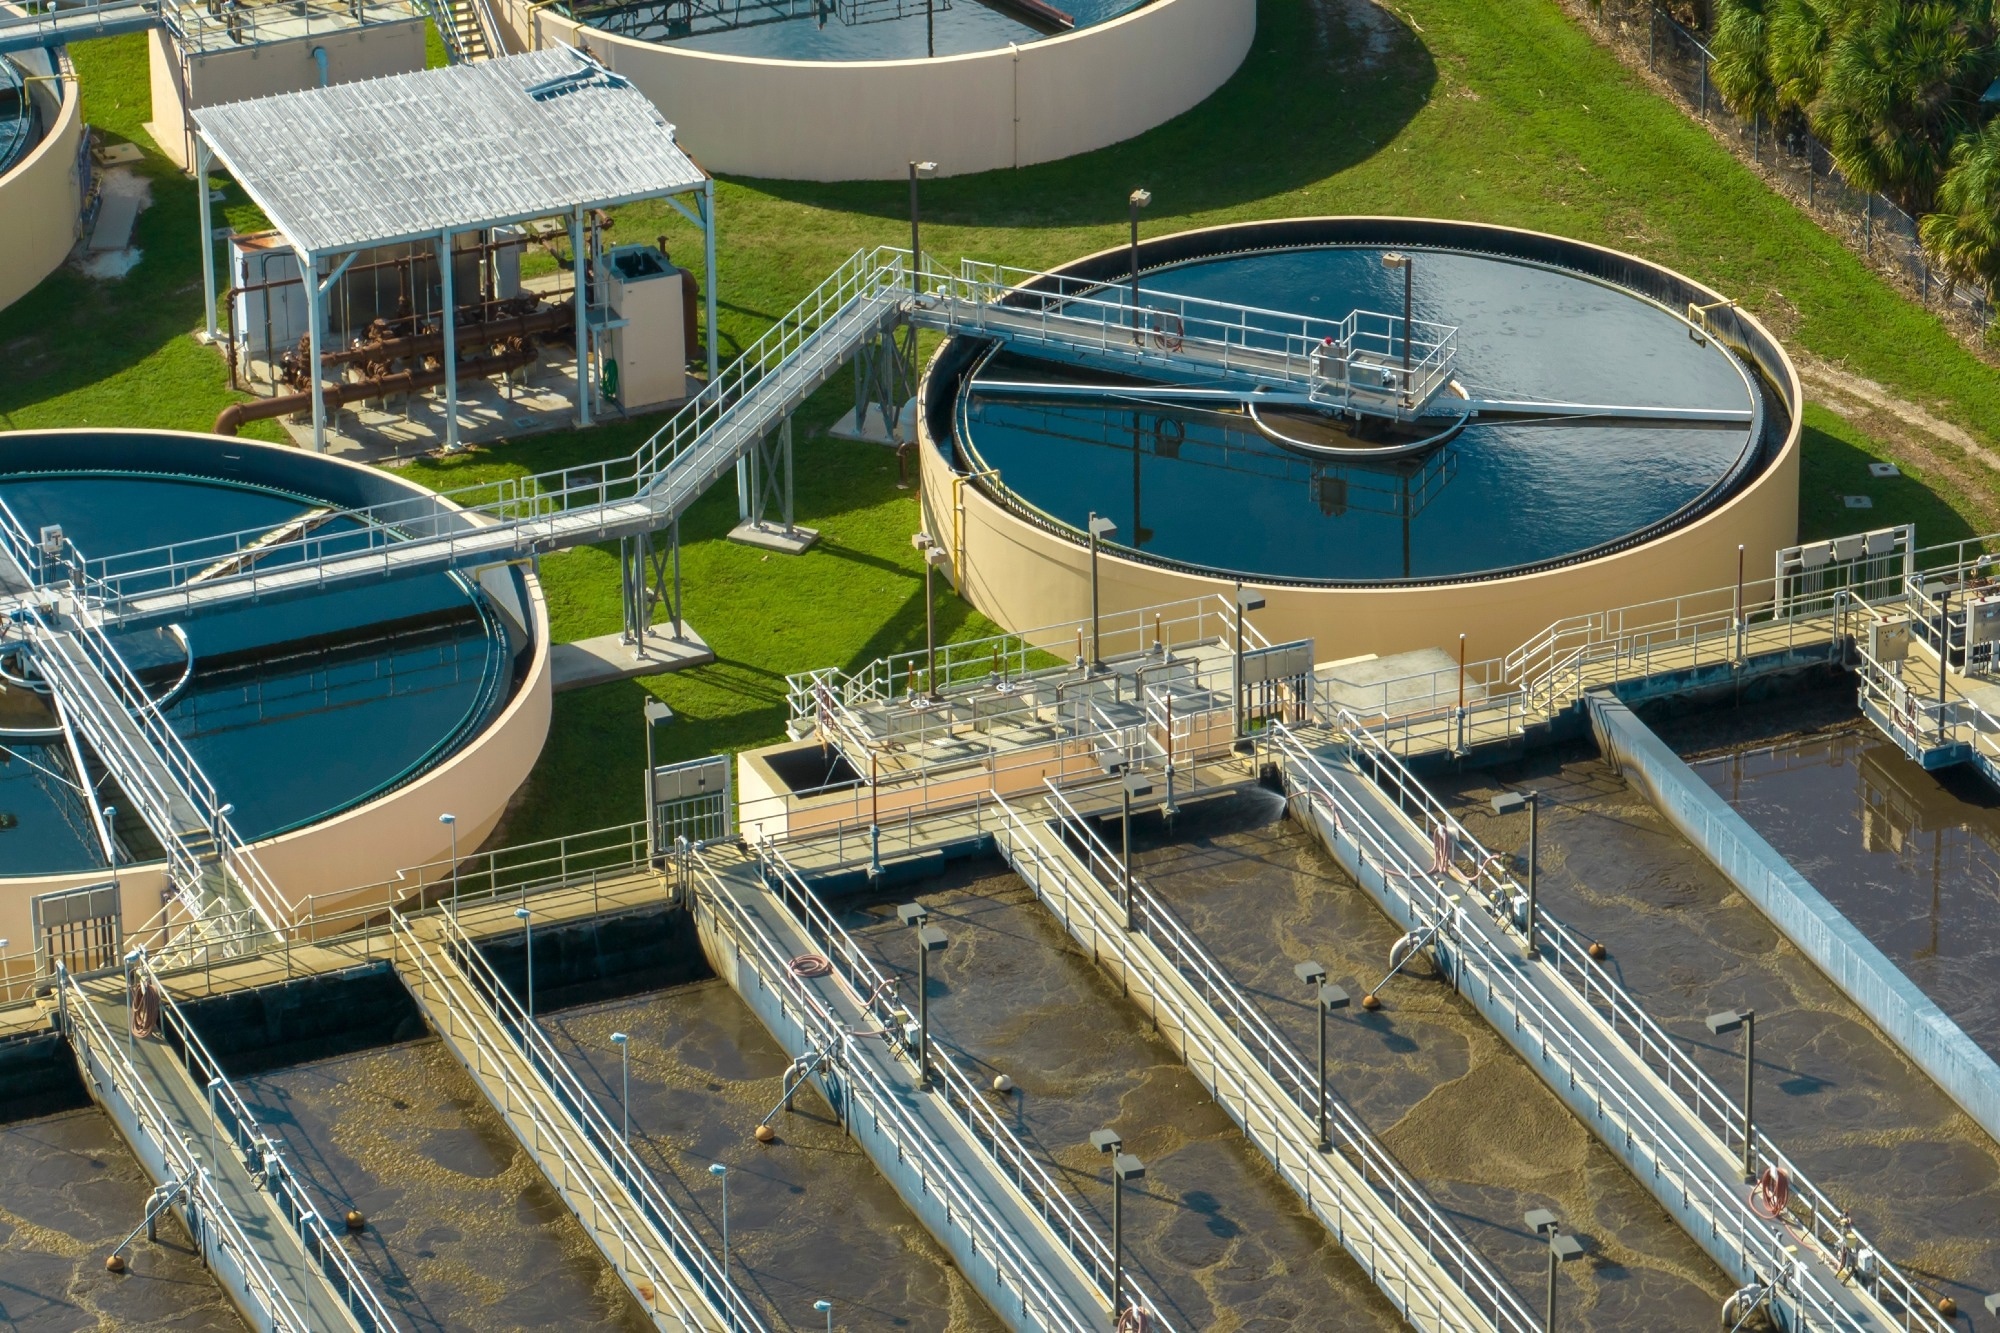 Study: Use of Wastewater Metrics to Track COVID-19 in the US. Image Credit: Bilanol/Shutterstock.com